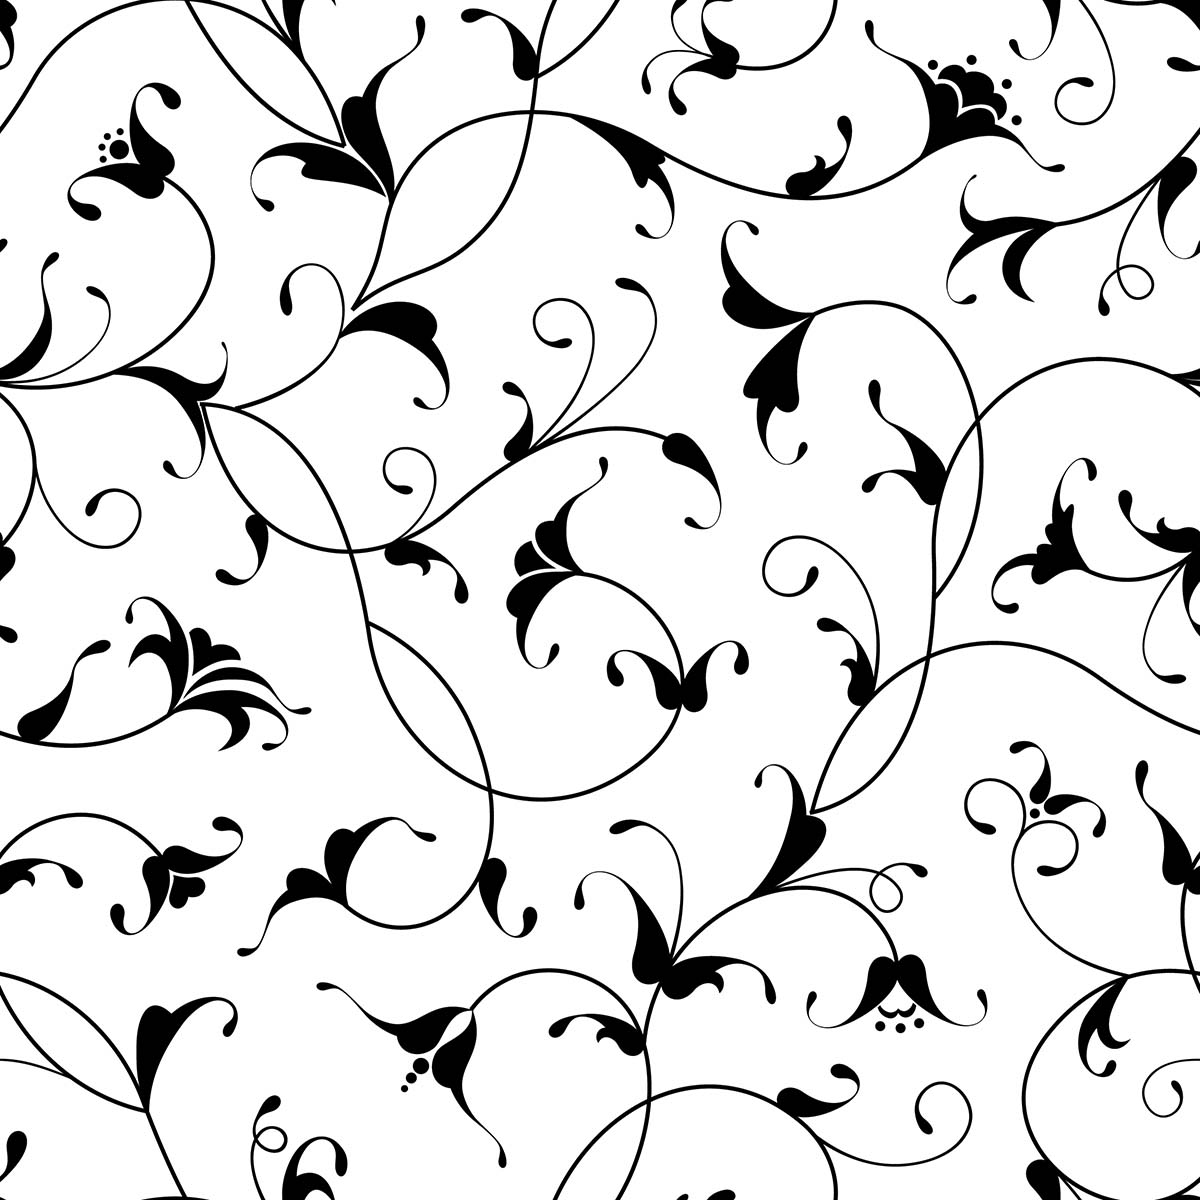 A black and white pattern